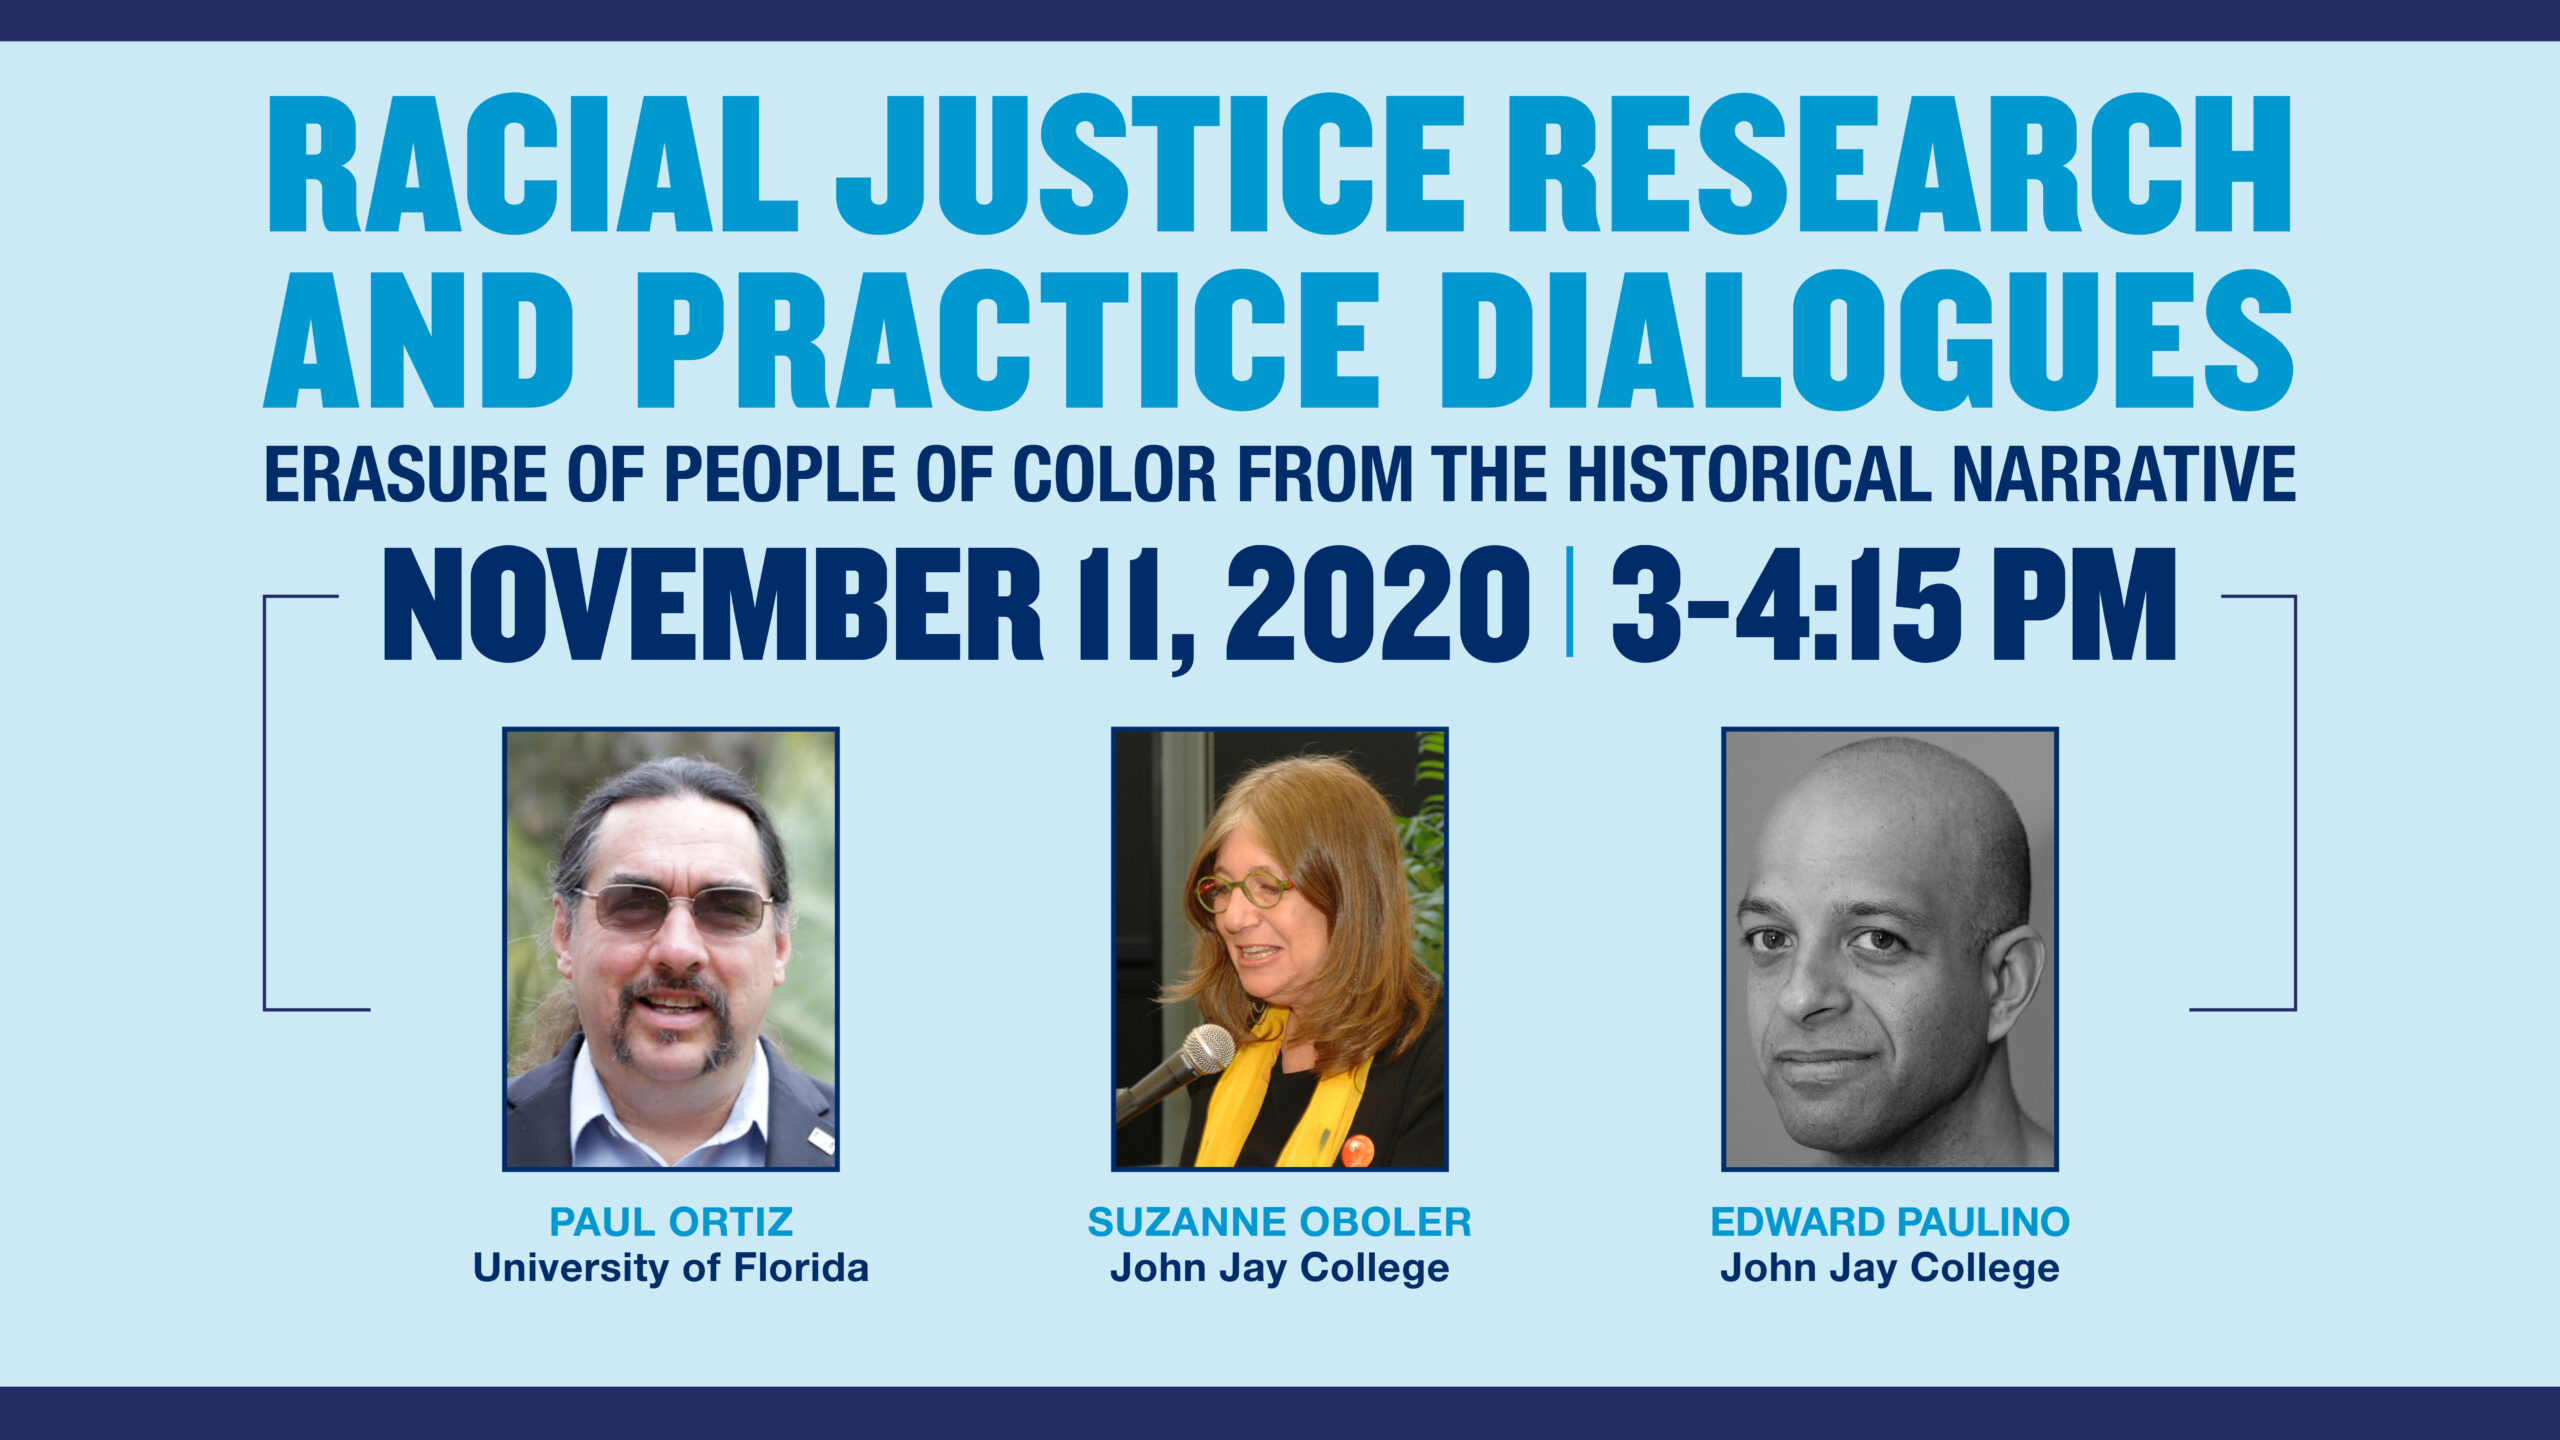 Racial Justice Research and Practice Dialogues 2020-21